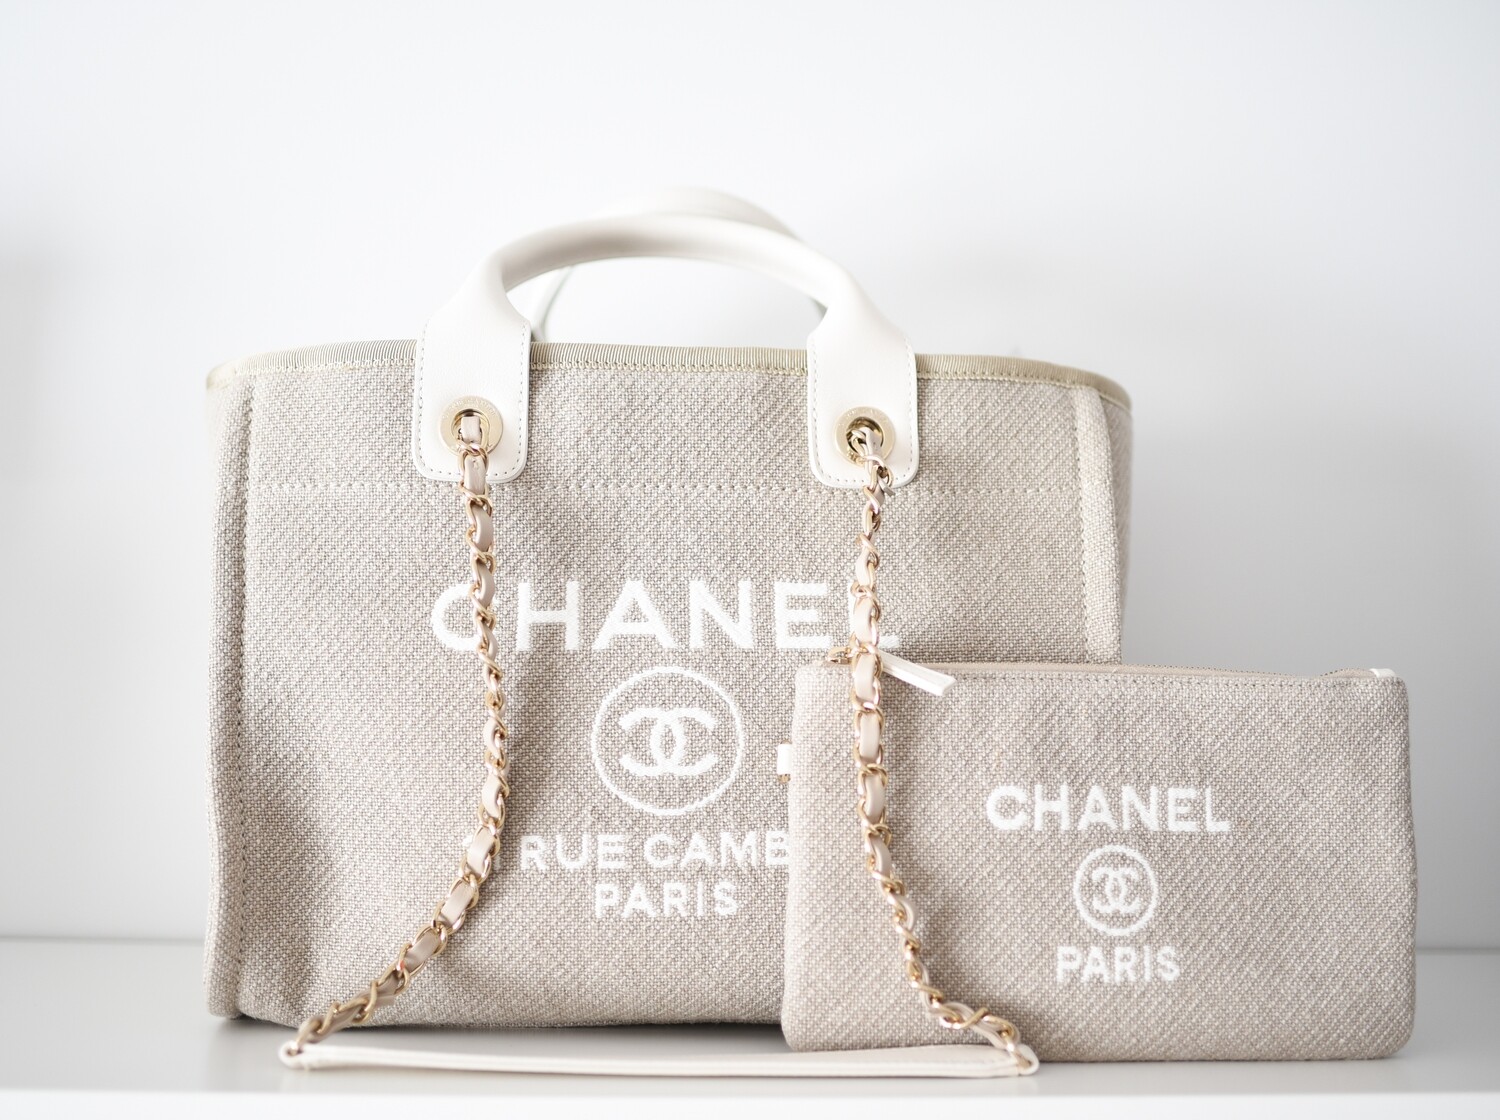 Chanel Deauville Small/Medium with Handles and Pouch, Beige with